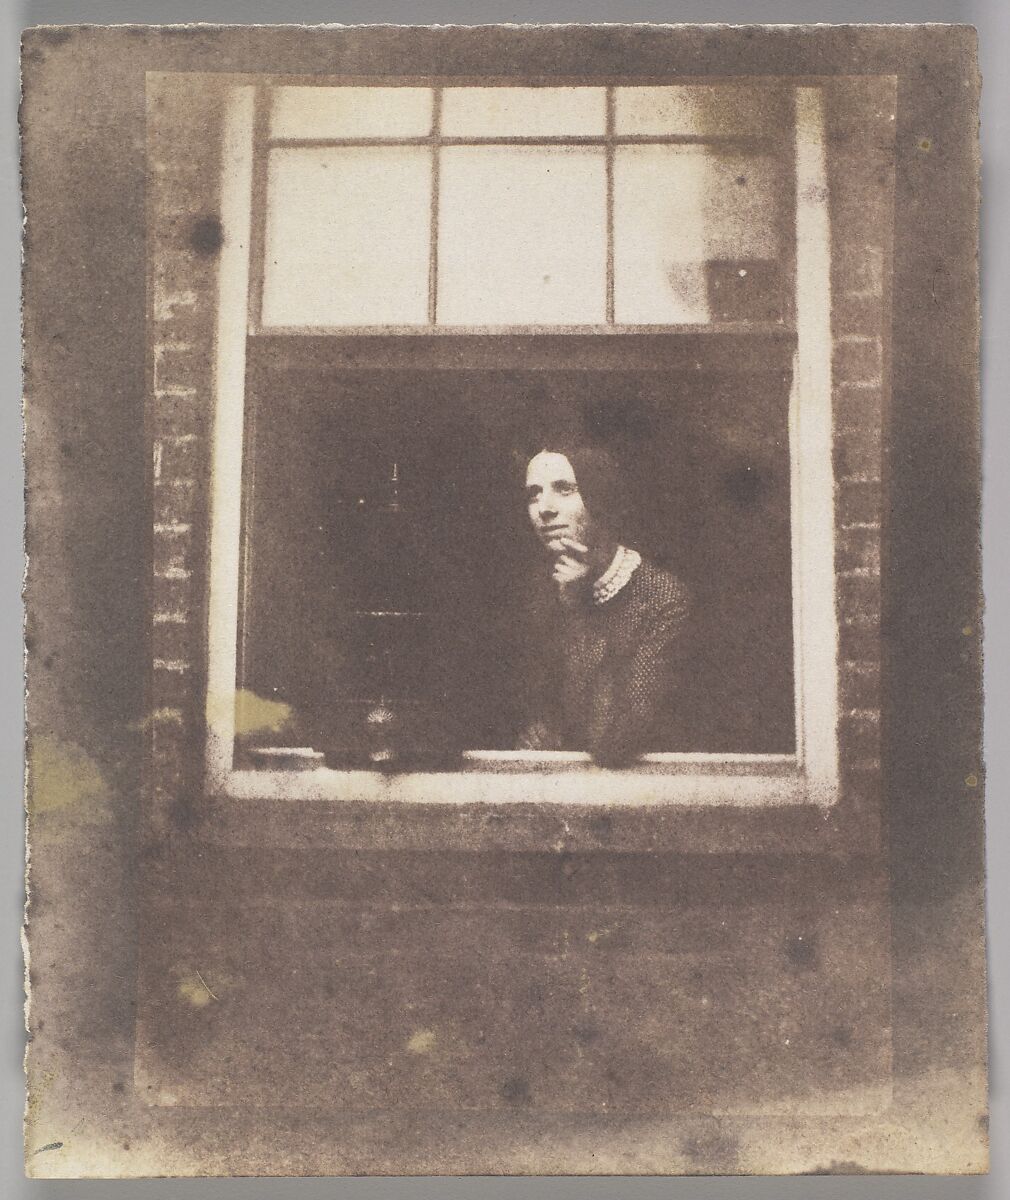 Lady in Open Window with Bird Cage, Calvert Richard Jones (British, Swansea, Wales 1802–1877 Bath, England) or his Circle, Salted paper print from paper negative 